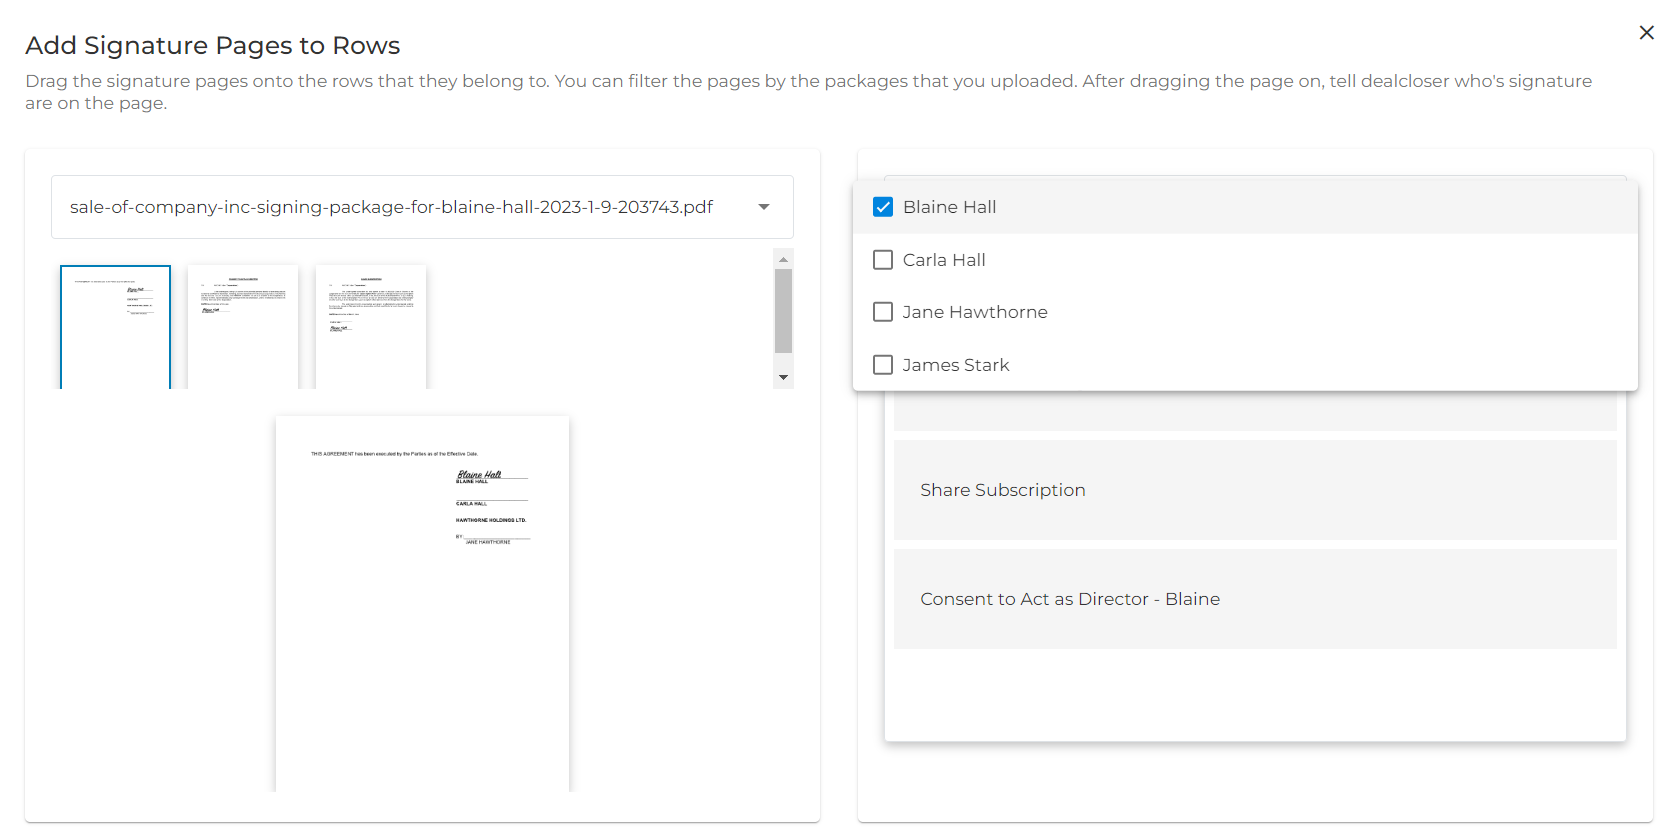 You can specify which clients signatures you are working with by unselecting the other clients.